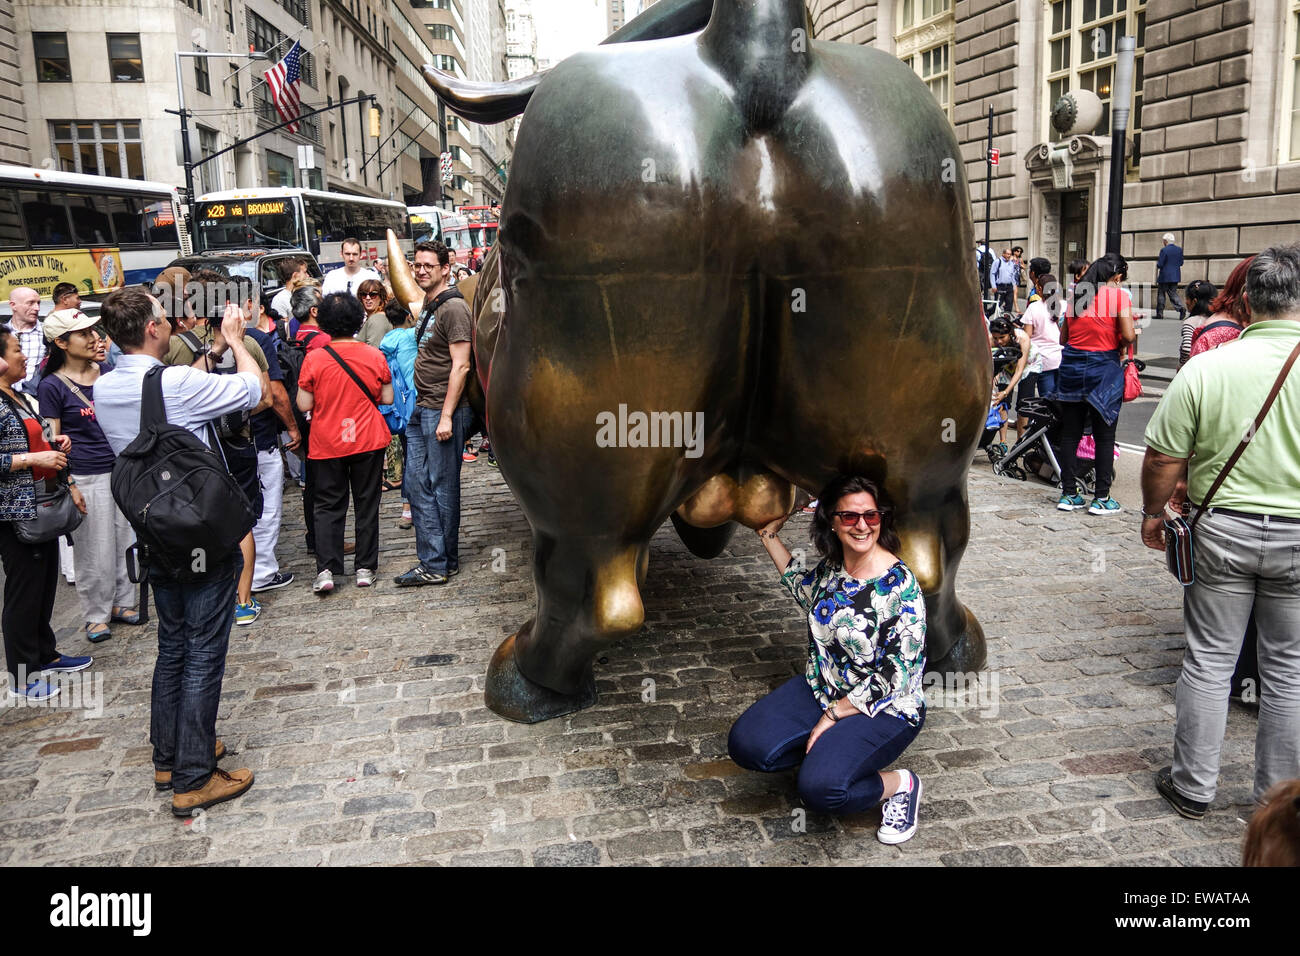 Tourists at the Charging Bull, Wall street, The New York Stock Exchange, NYC, lower Manhattan, United states. Stock Photo